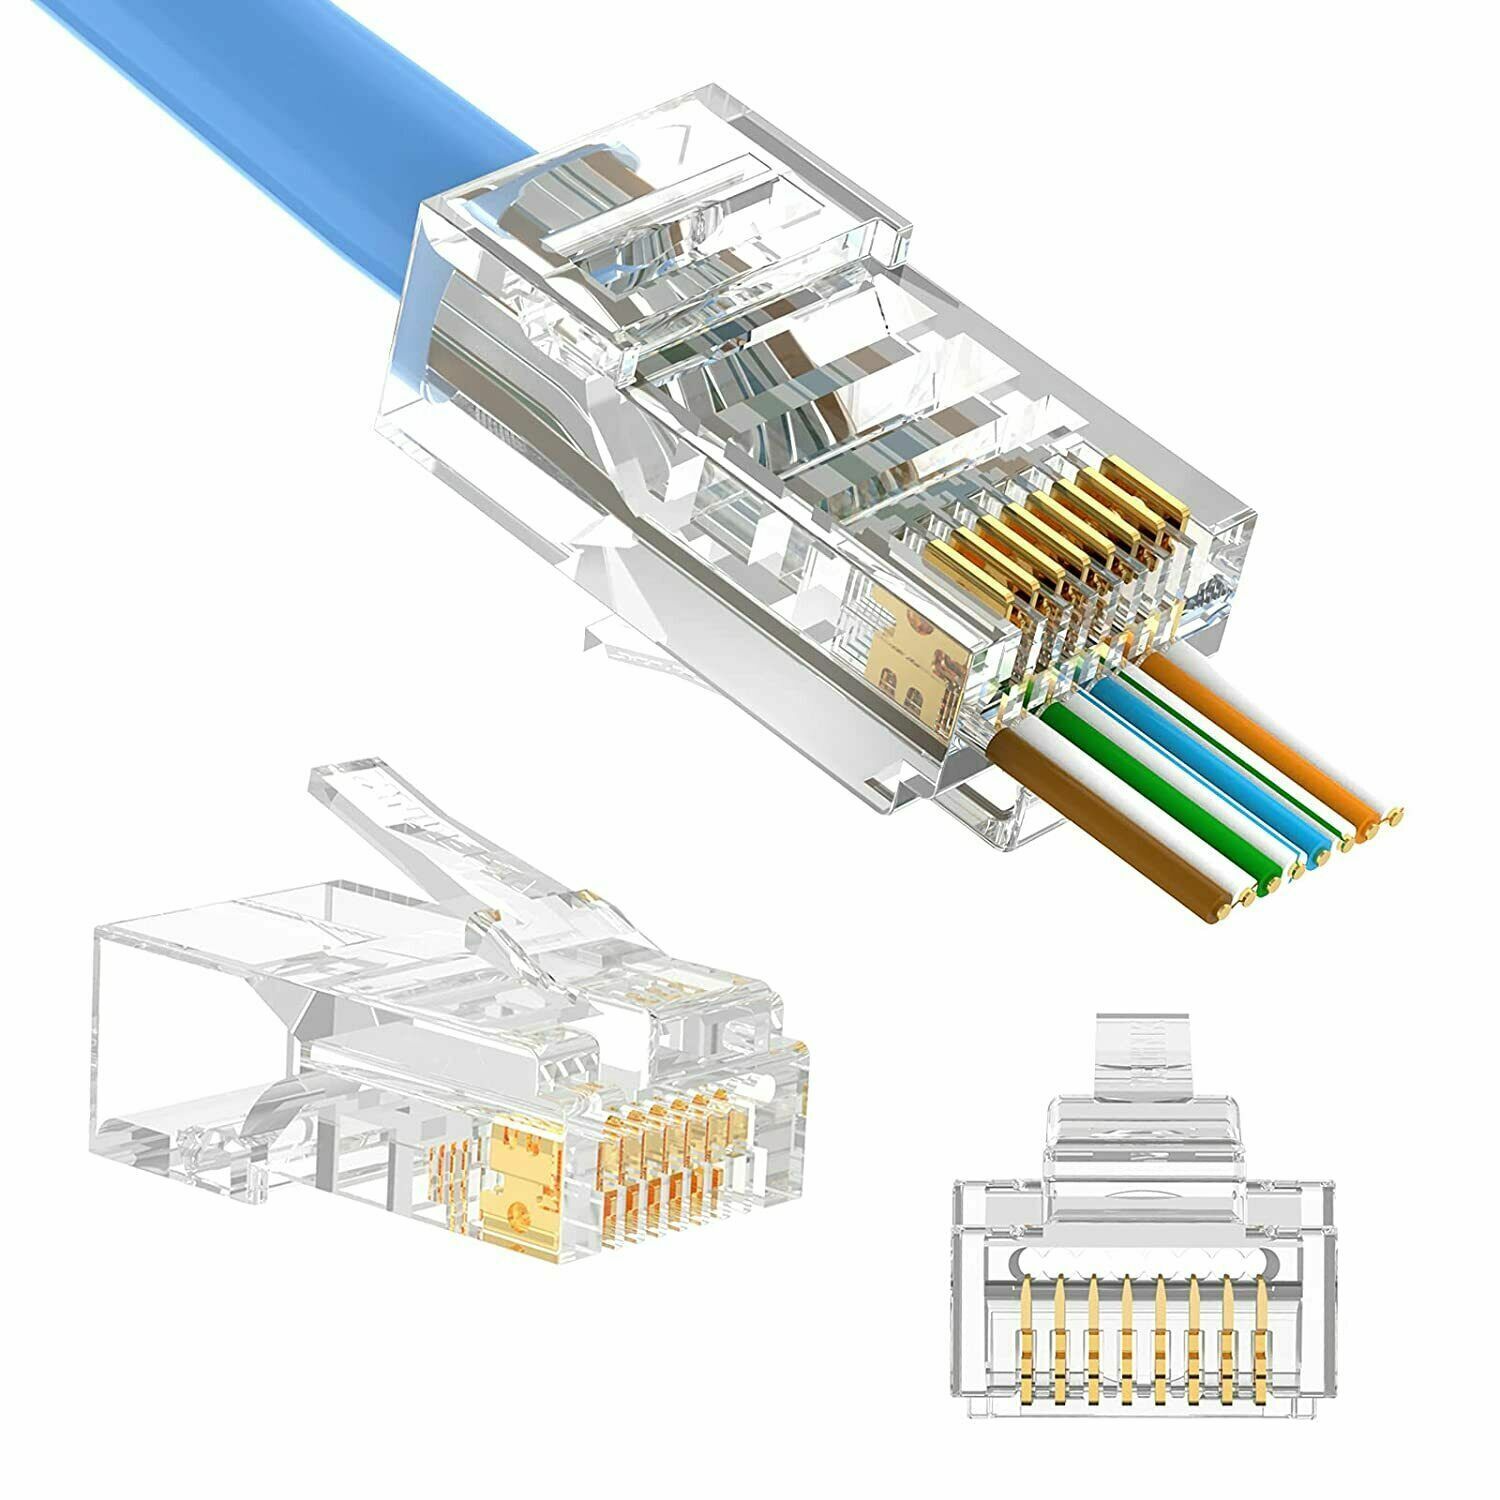 50Pc RJ45 Pass Through Modular Plug Network Cable Connector End - Click Image to Close